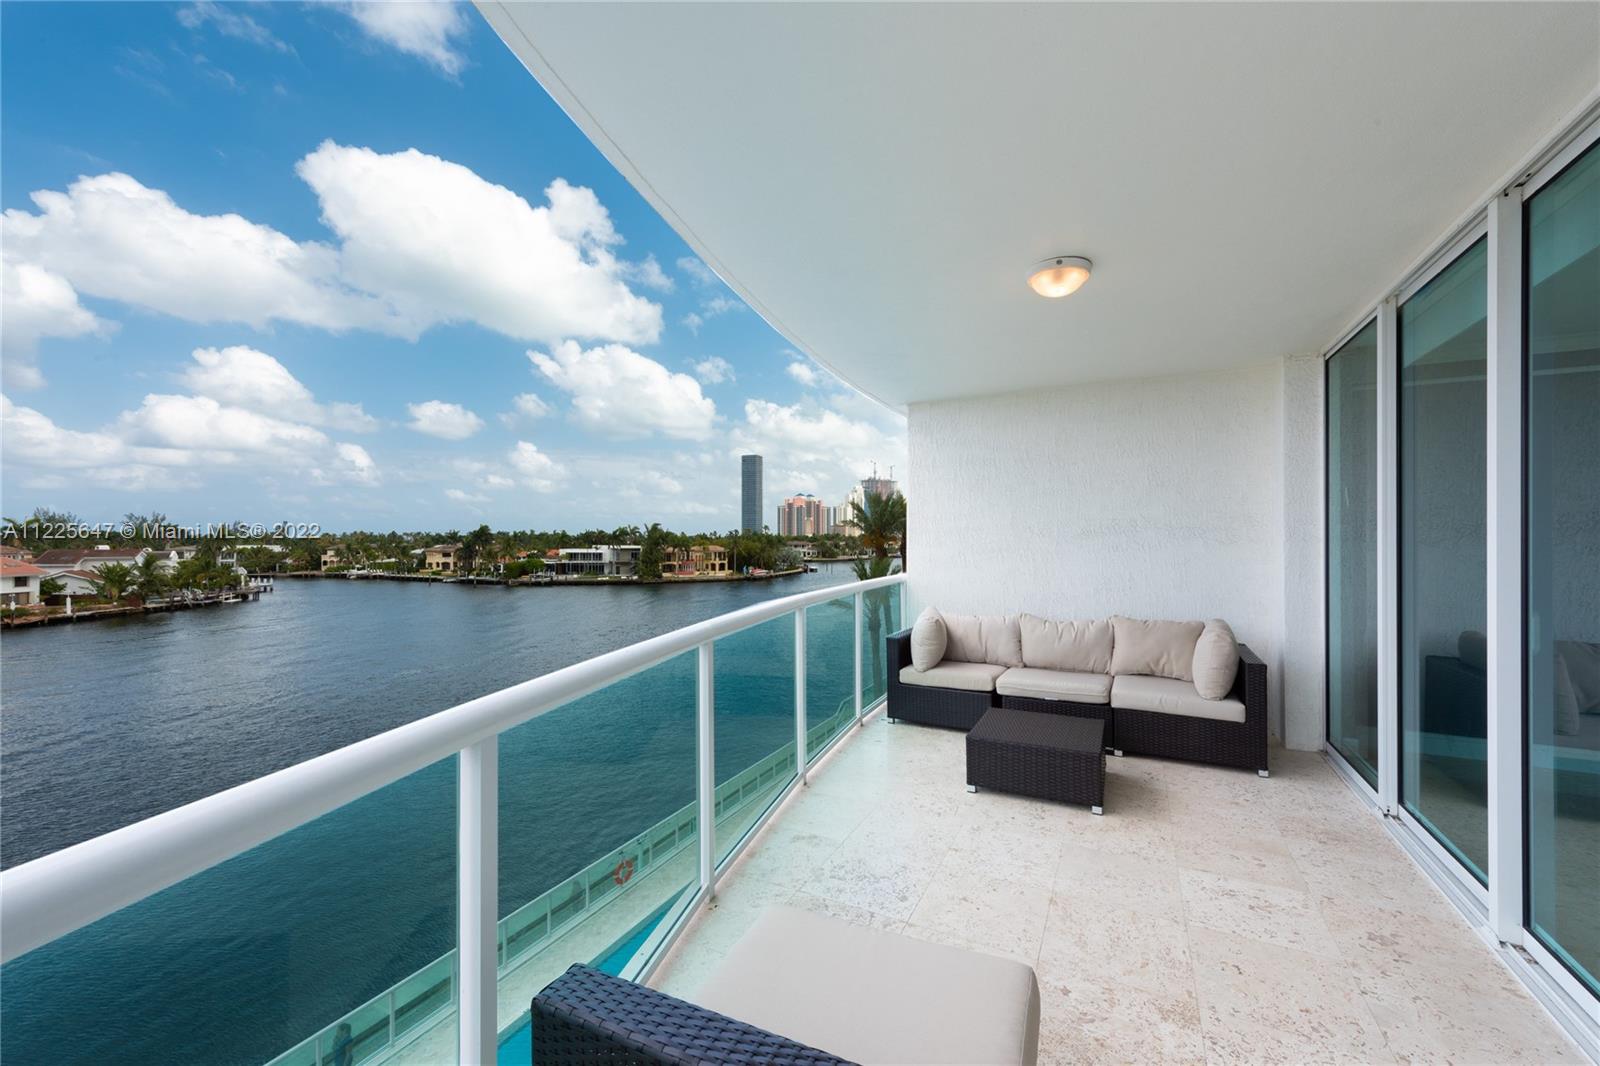 a balcony with seating space and lake view